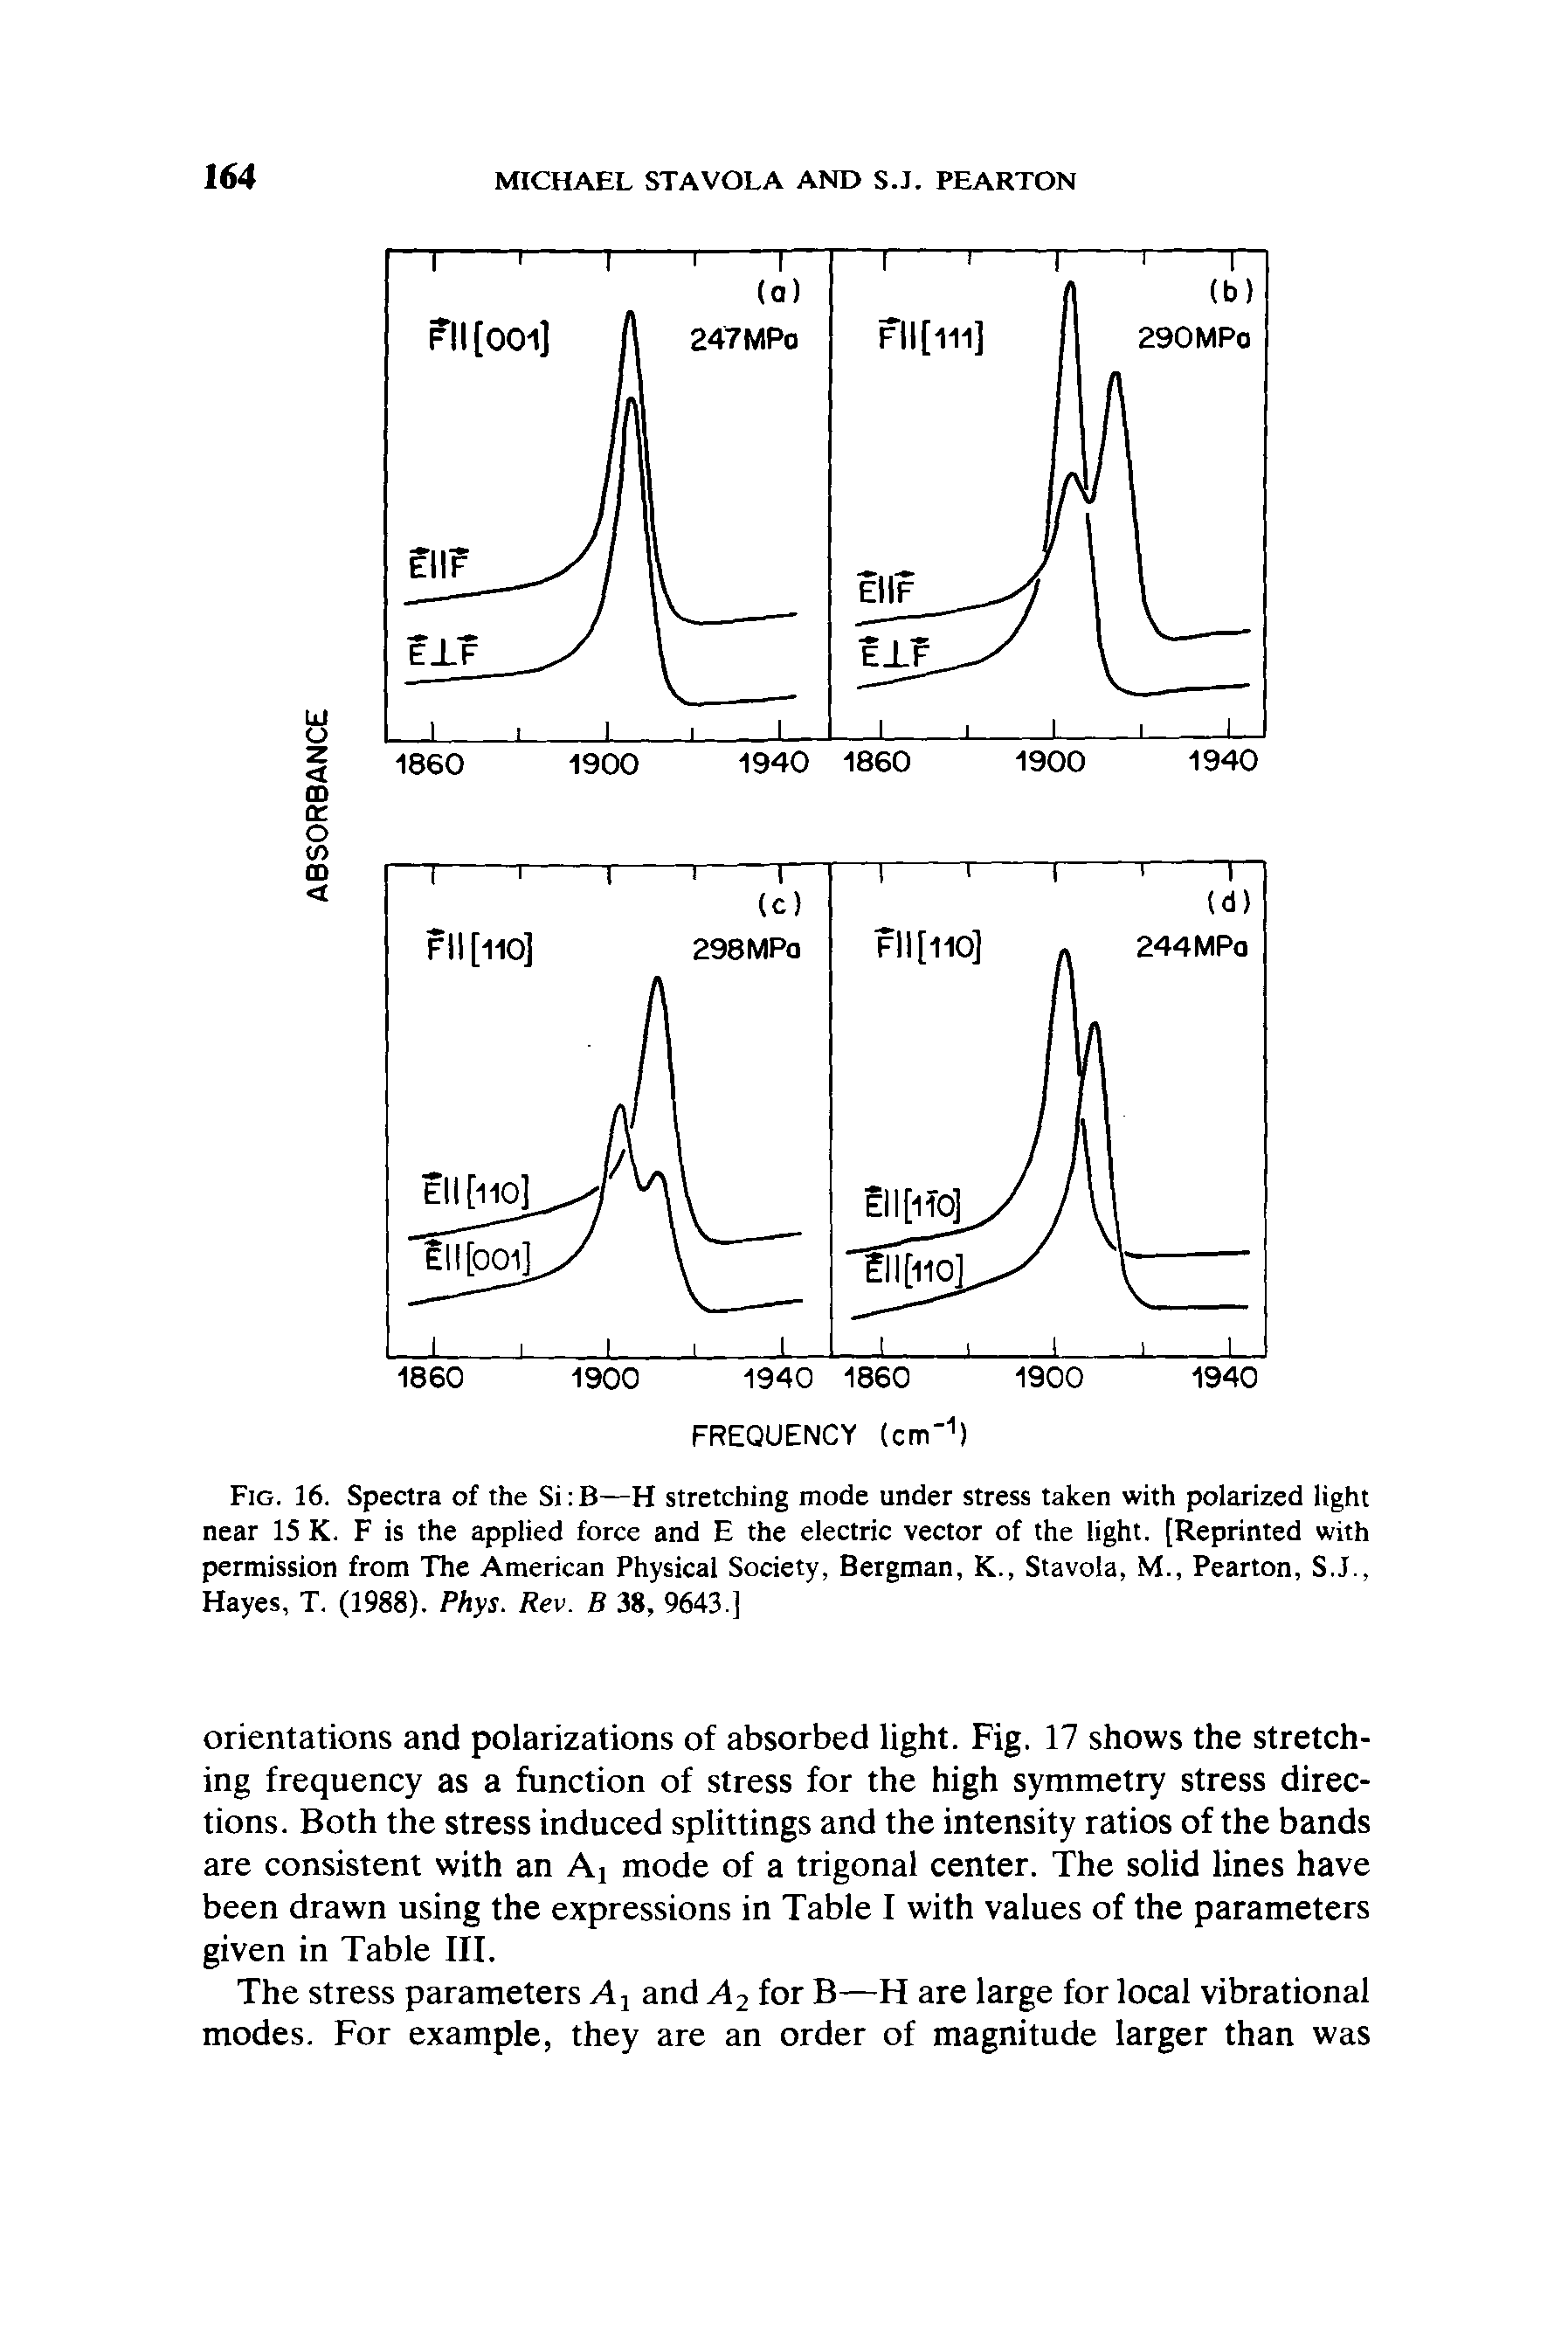 Fig. 16. Spectra of the Si B—H stretching mode under stress taken with polarized light near 15 K. F is the applied force and E the electric vector of the light. [Reprinted with permission from The American Physical Society, Bergman, K., Stavola, M., Pearton, S.J., Hayes, T. (1988). Phys. Rev. B 38, 9643 ]...